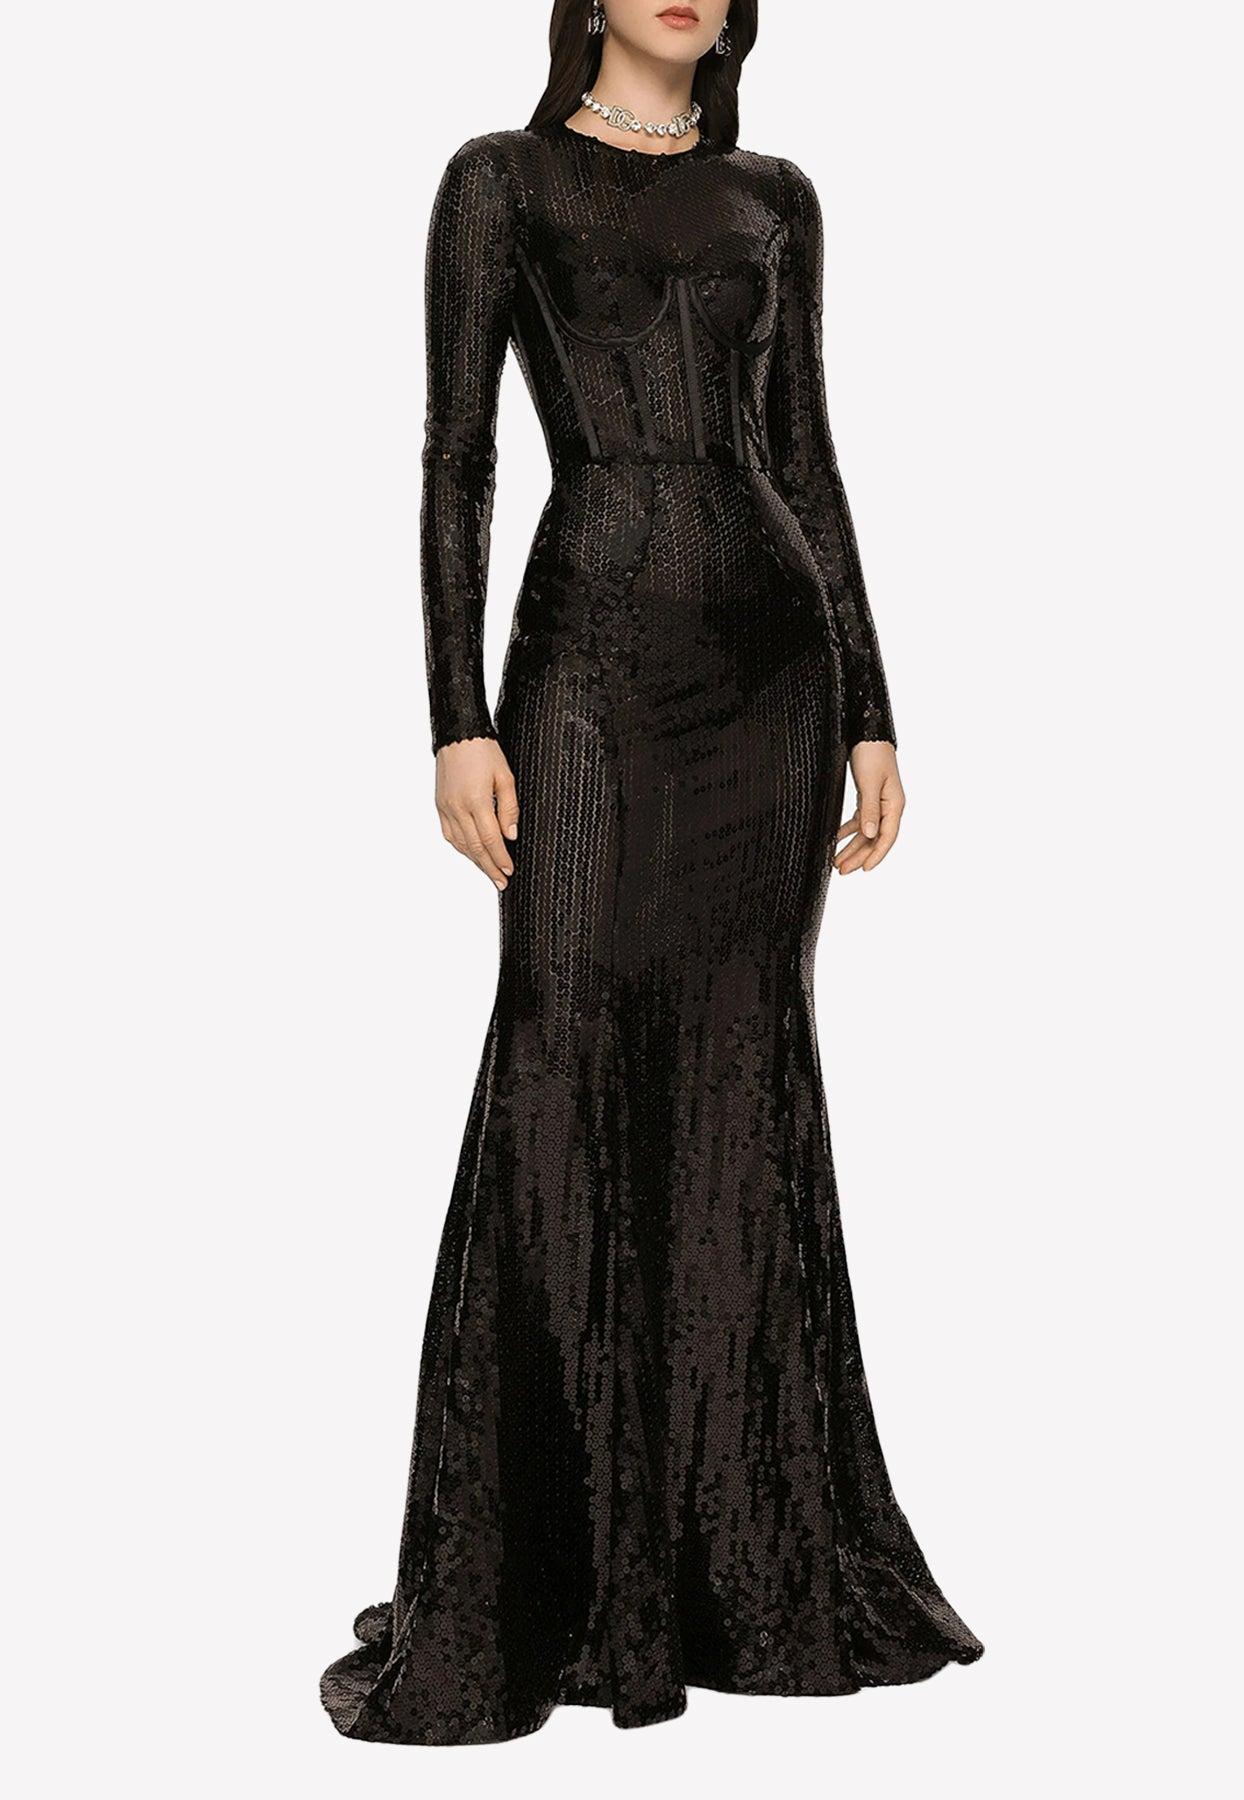 Dolce & Gabbana Sequin Embellished Gown in Black | Lyst